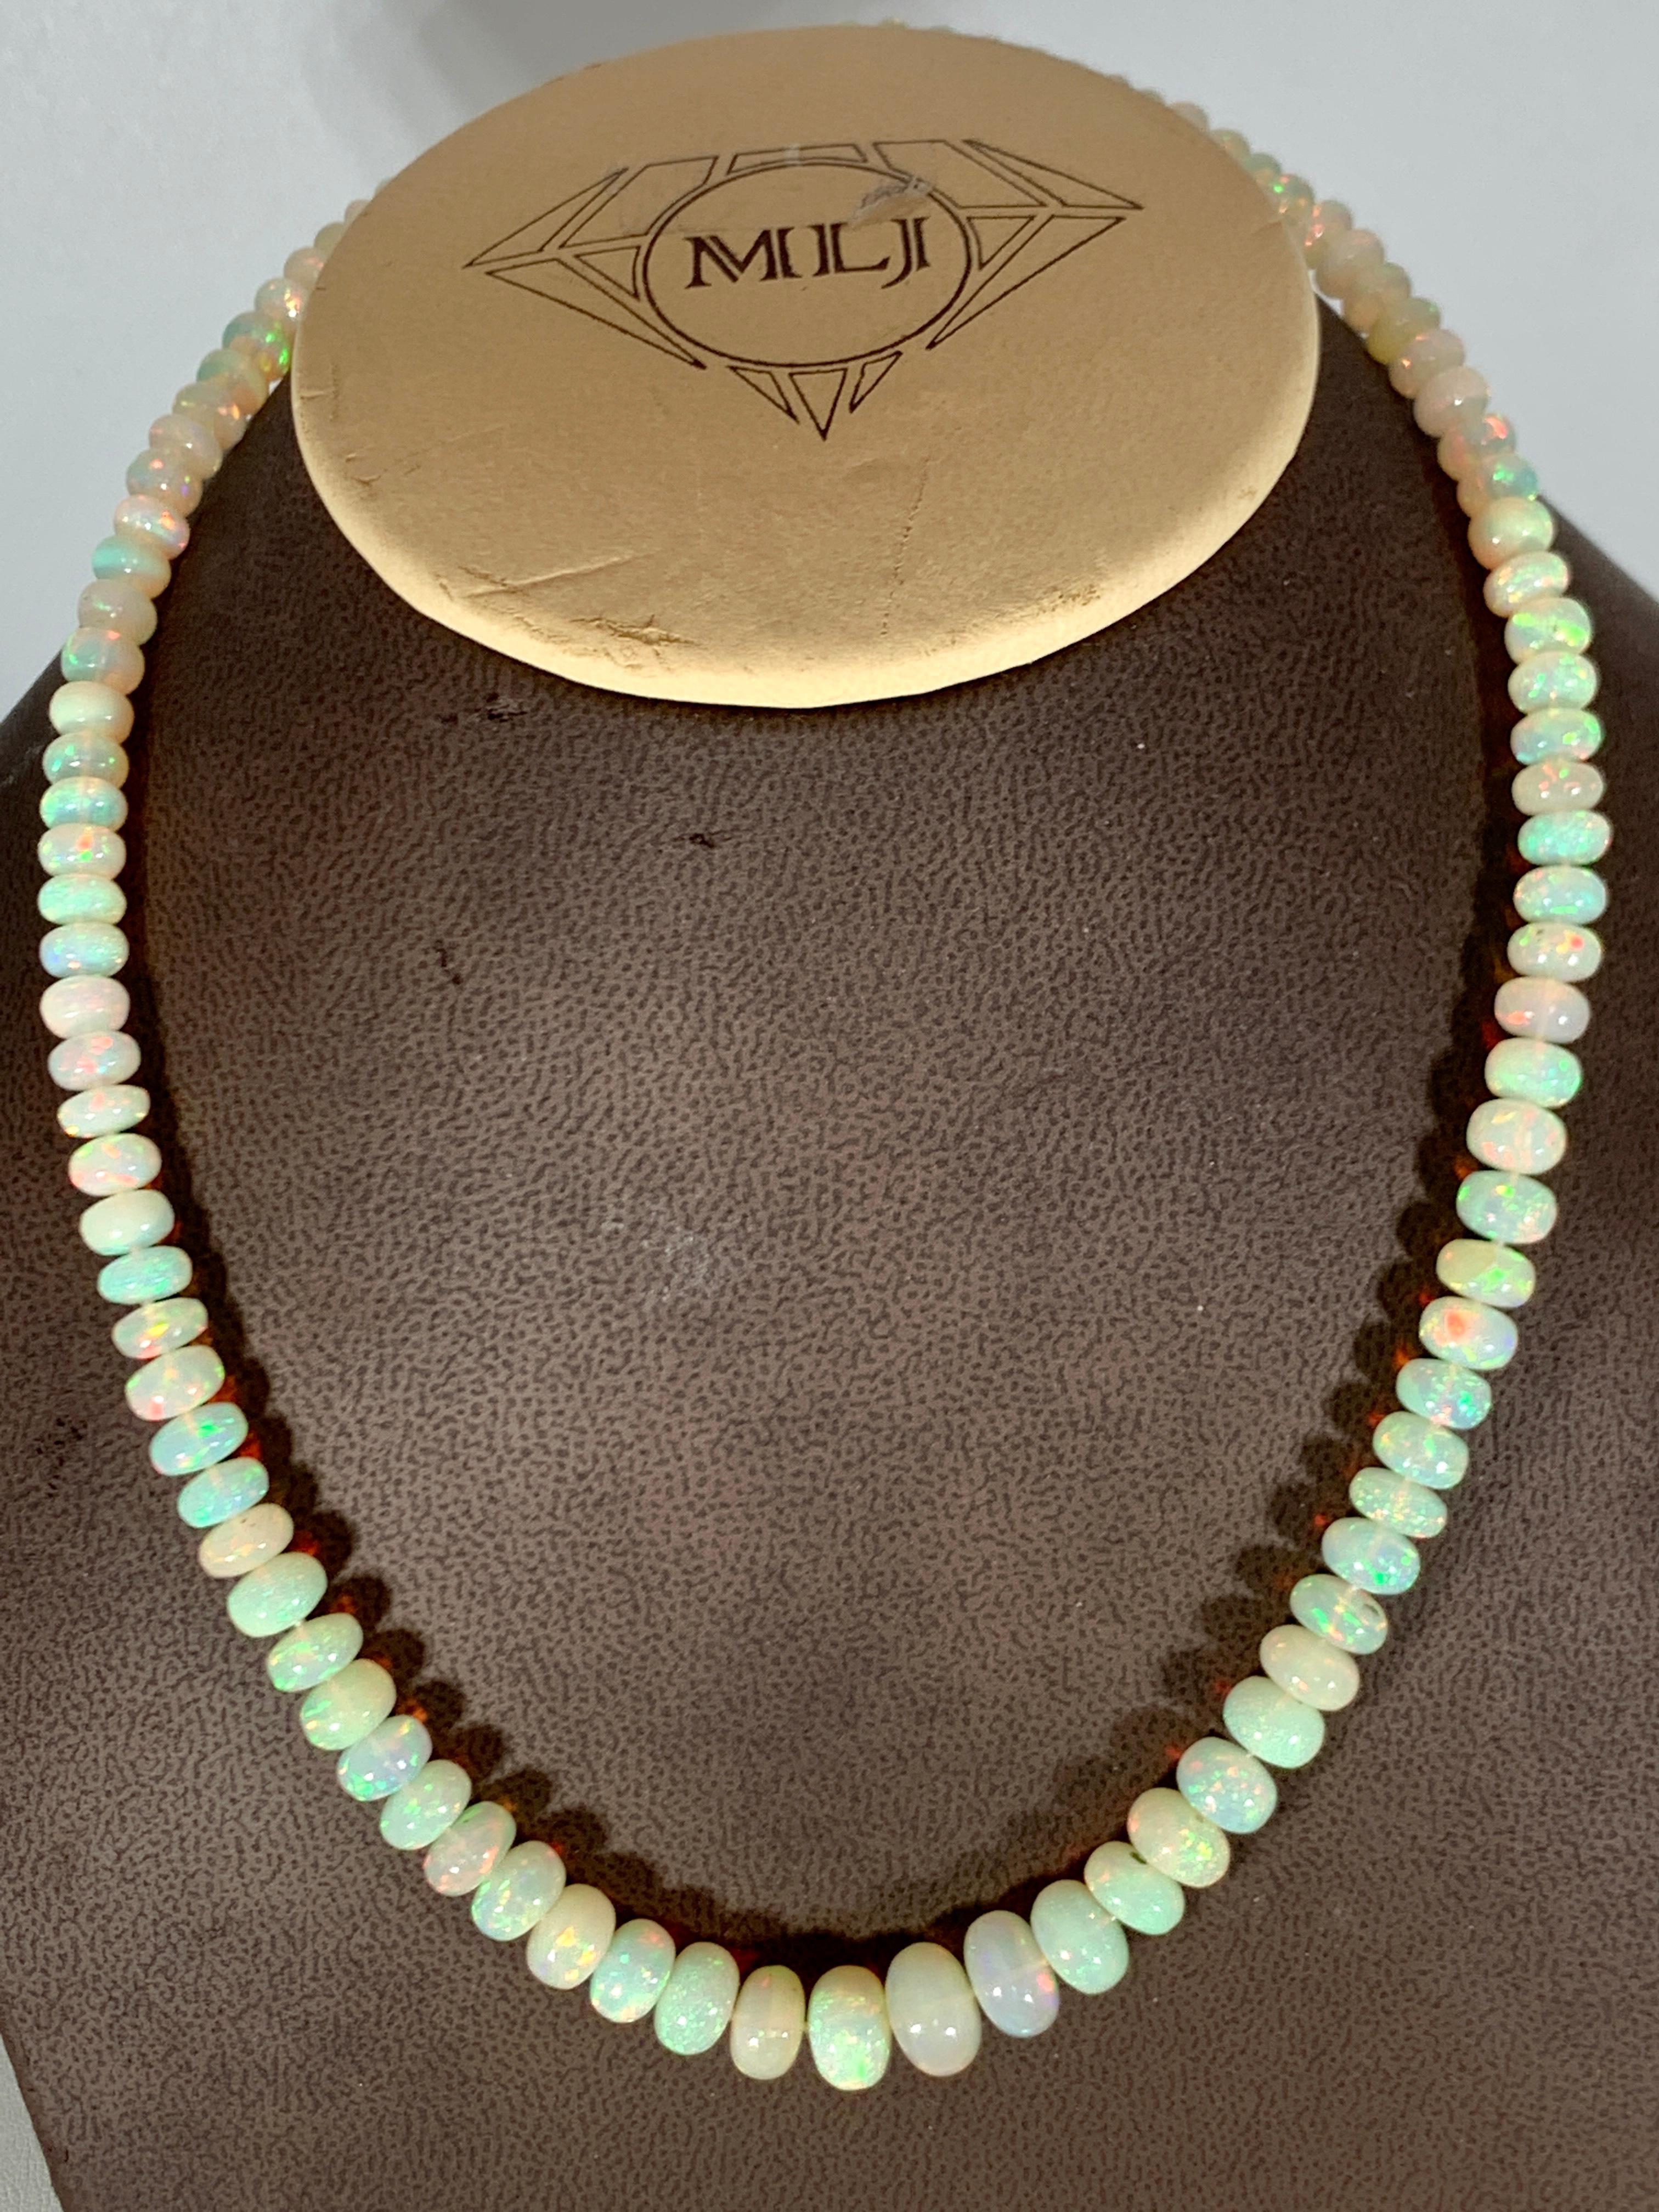  Natural Opal single strand Bead Necklace with 14 Karat gold Clasp. These are Ethiopian Beads
17